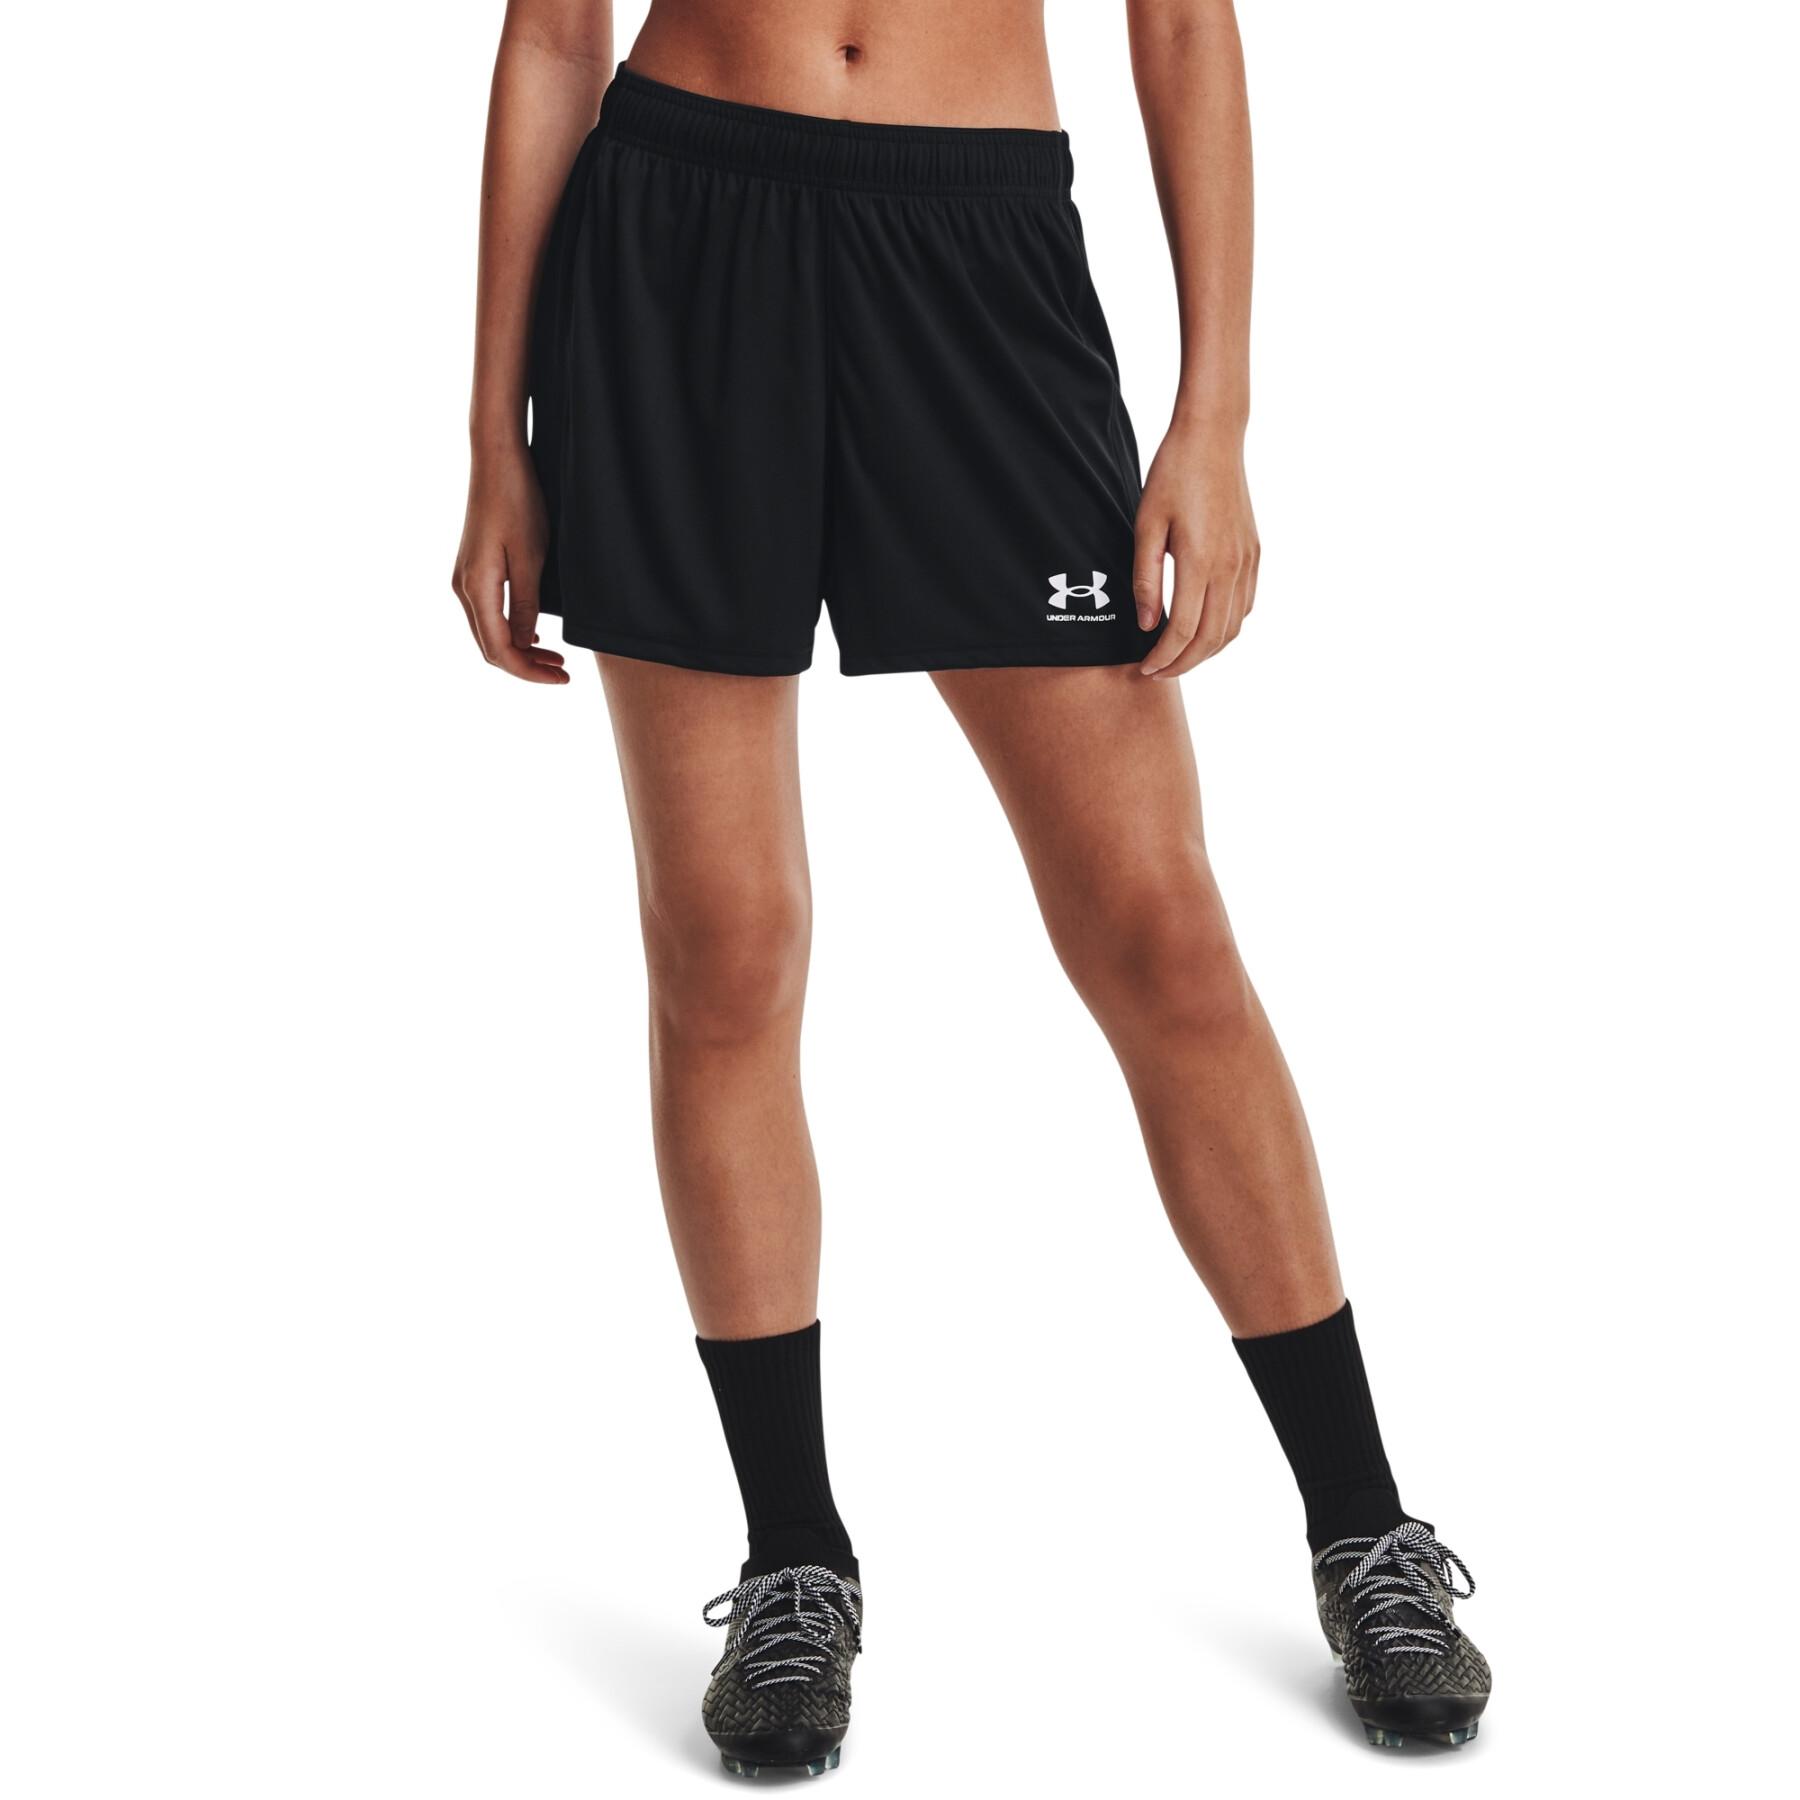 Women's knitted shorts Under Armour Challenger